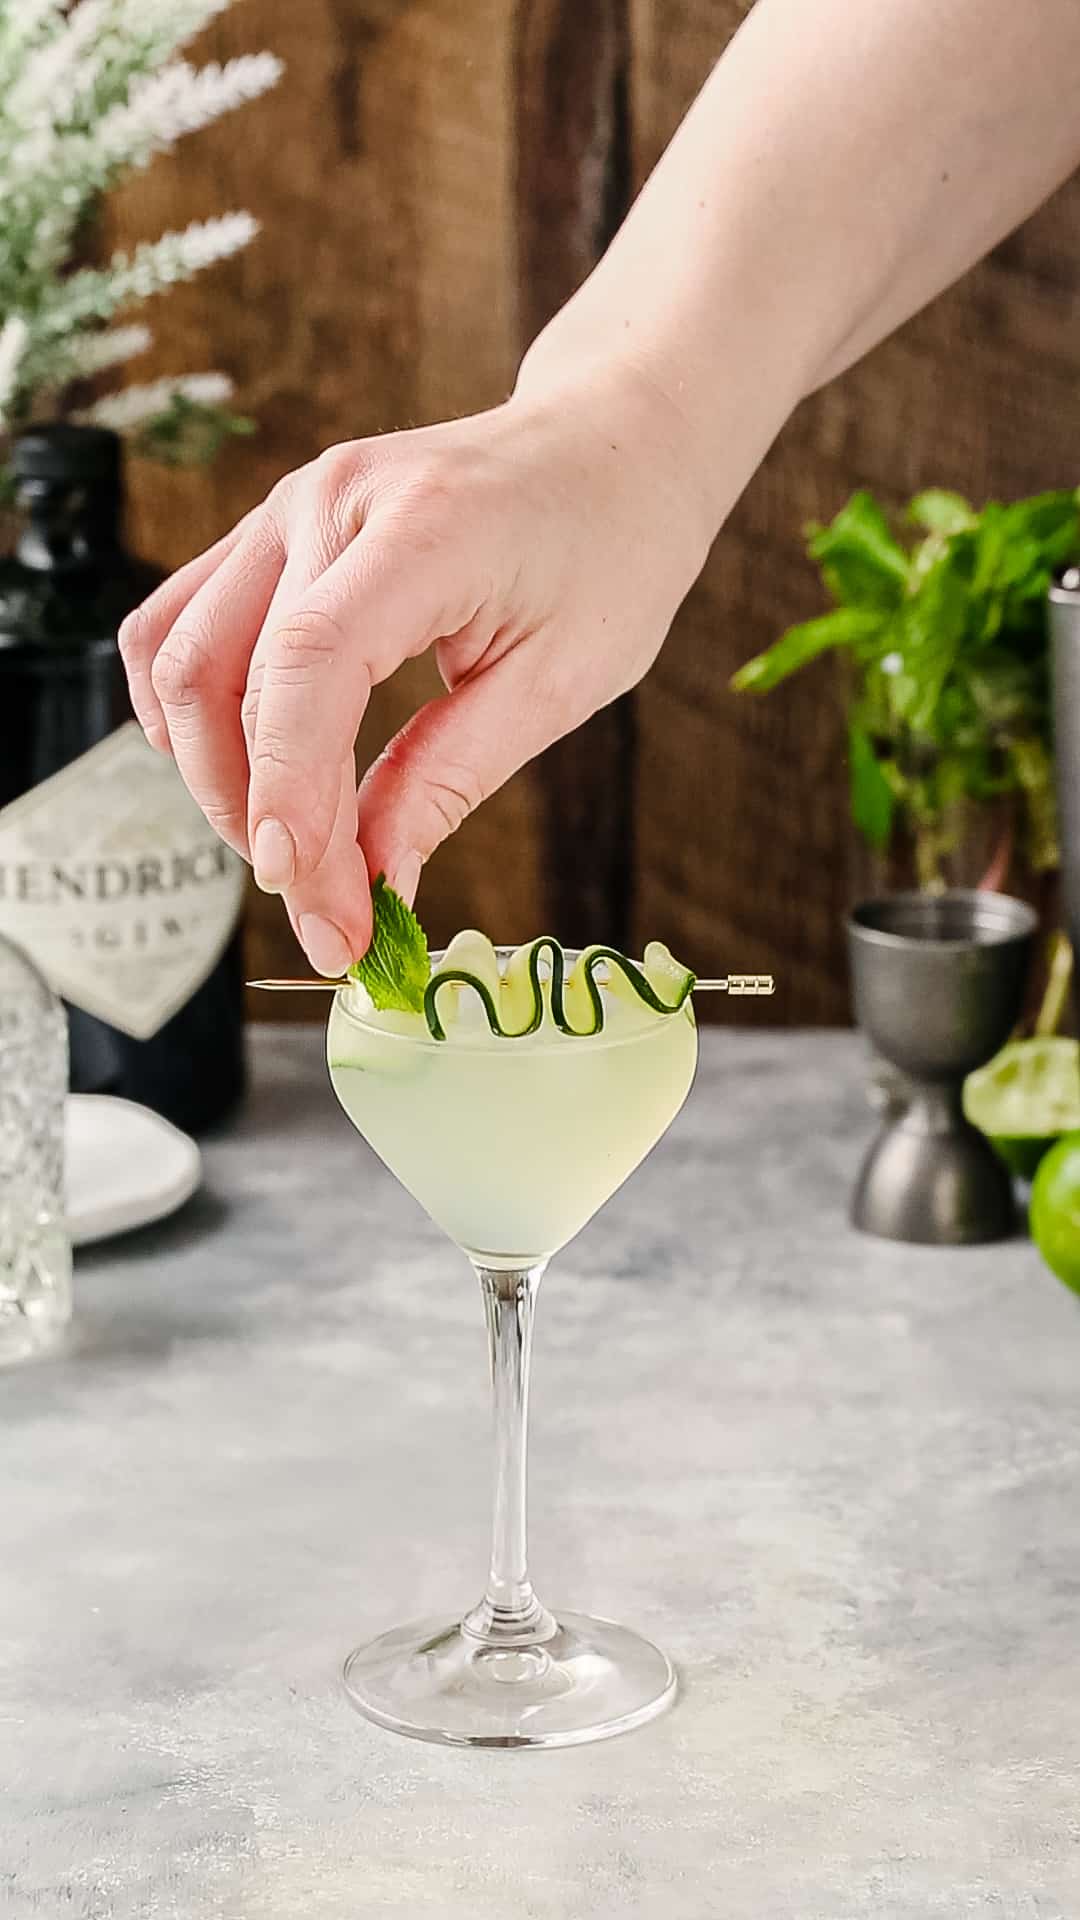 Hand adding a sprig of mint to a cocktail as a garnish.